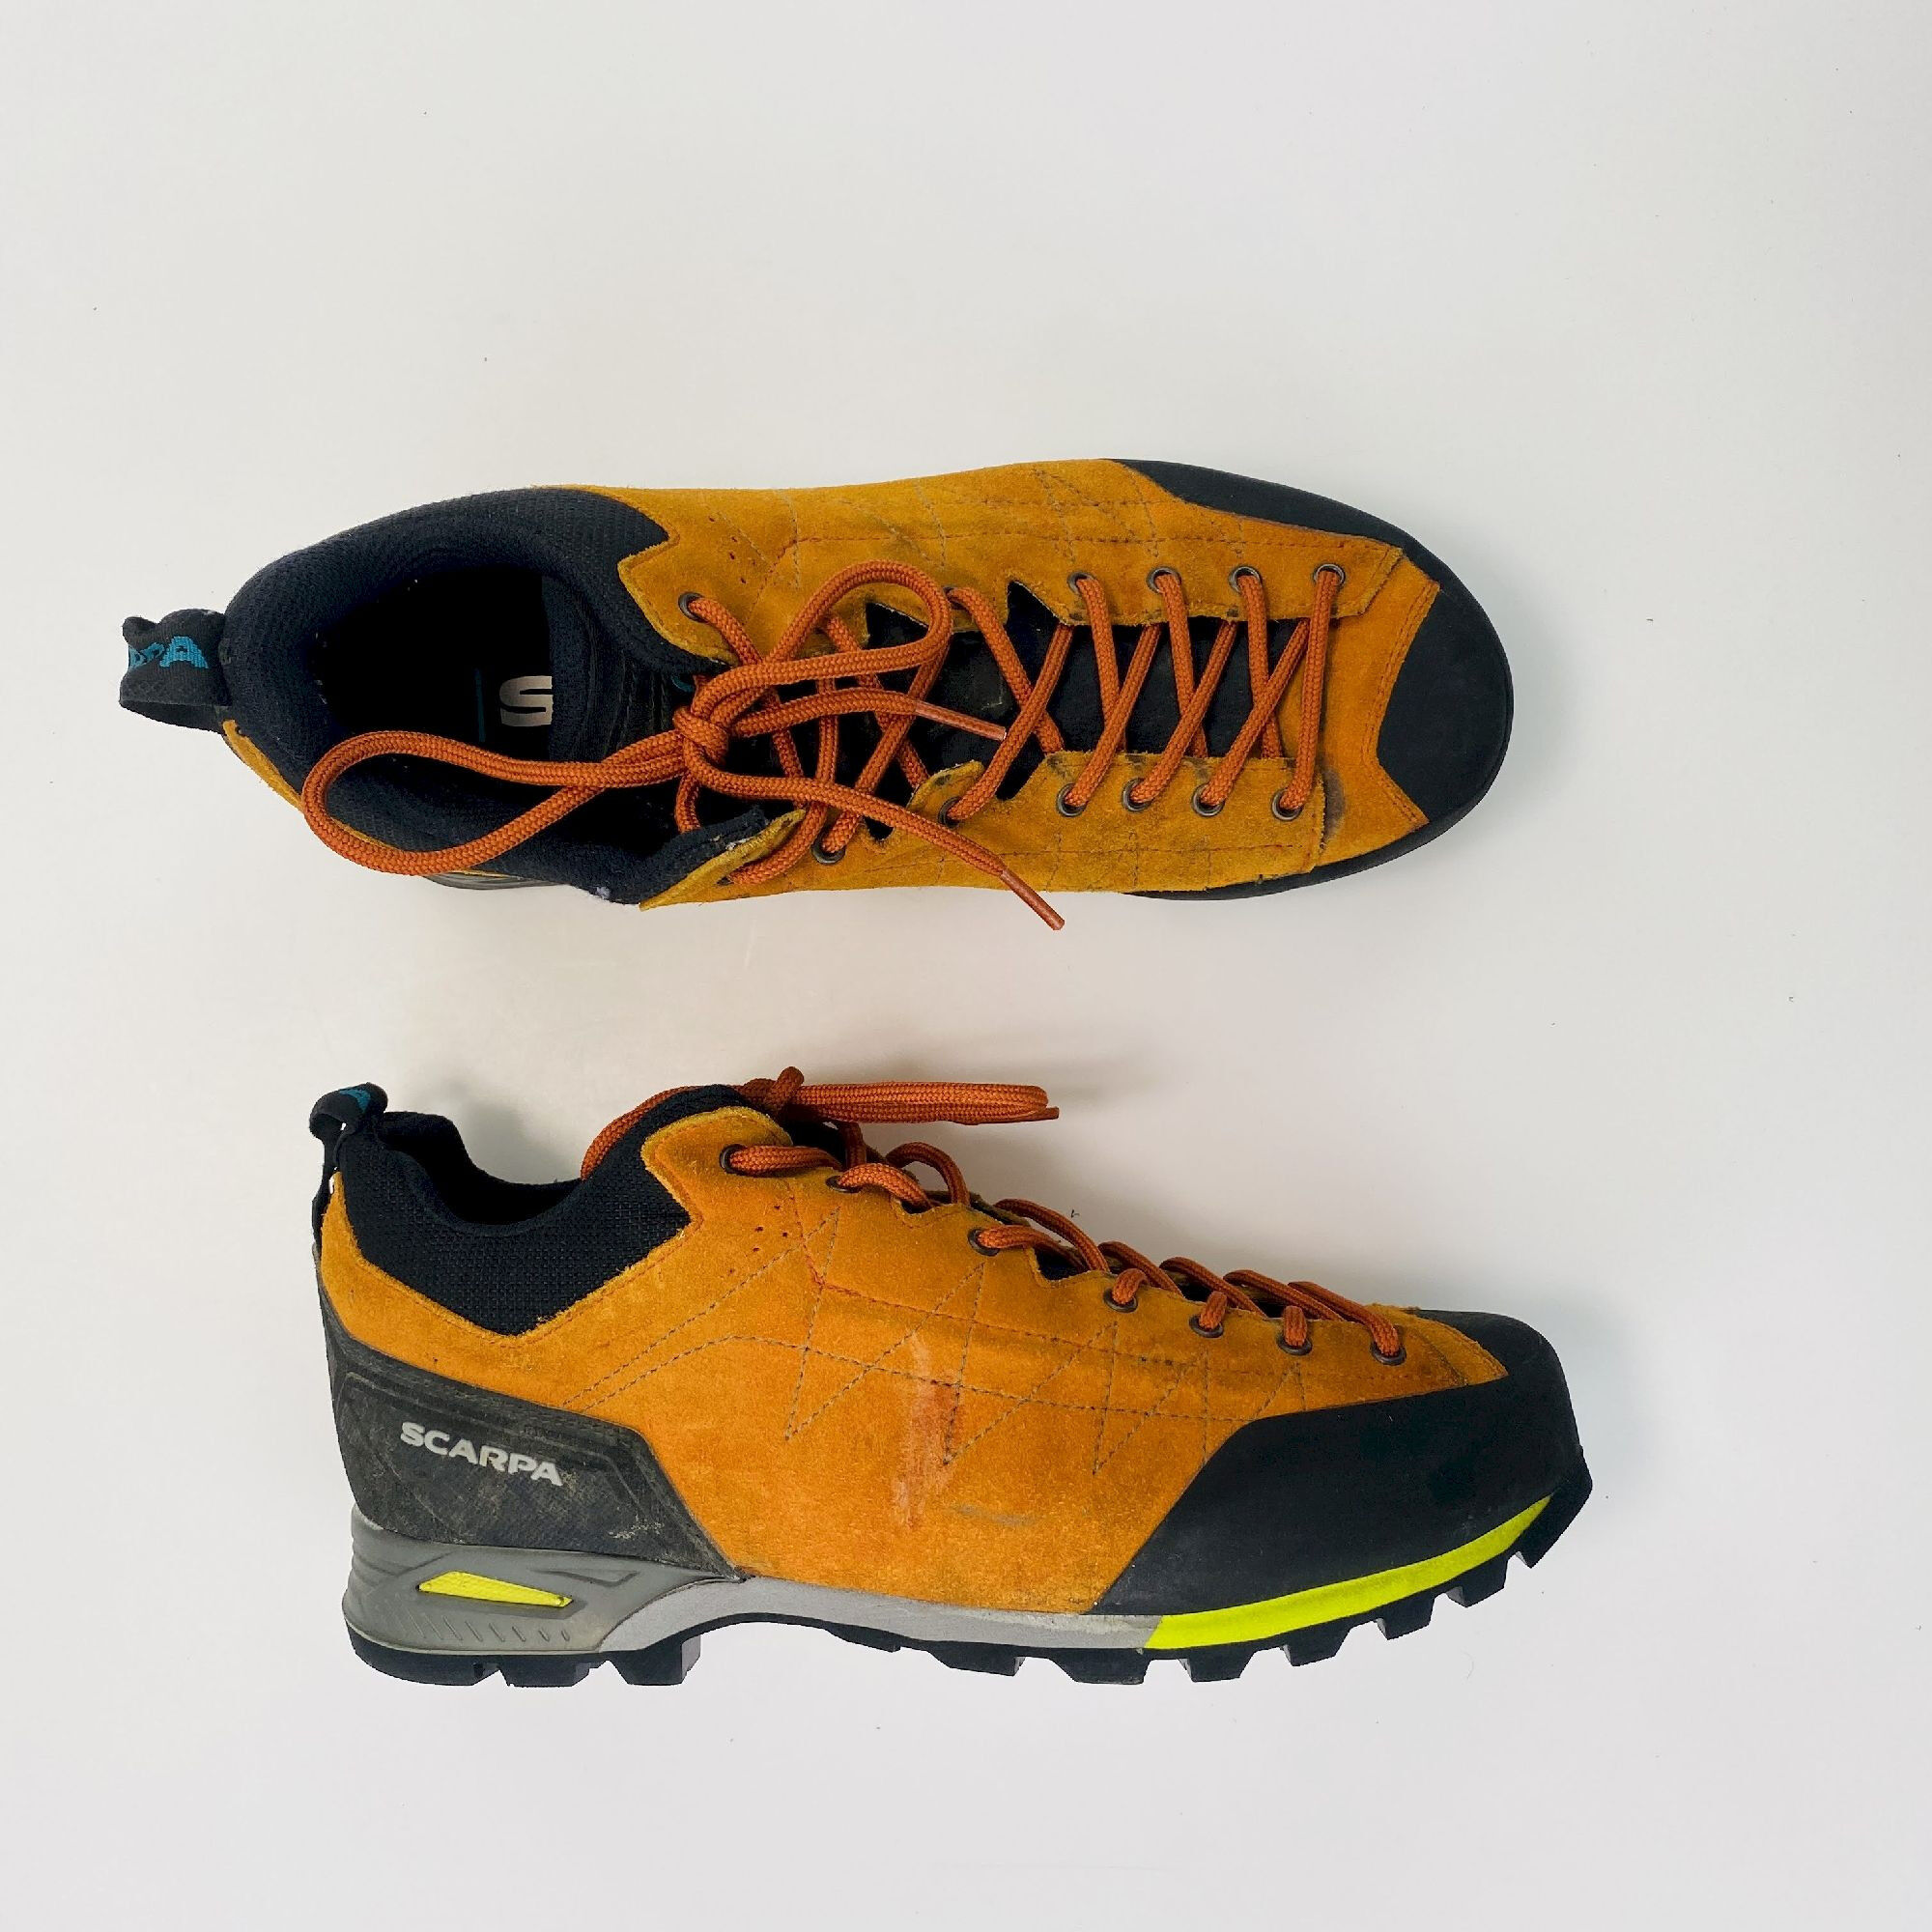 Scarpa Chaussure d'approche - Second Hand Mountaineering boots - Men's - Orange - 41.5 | Hardloop